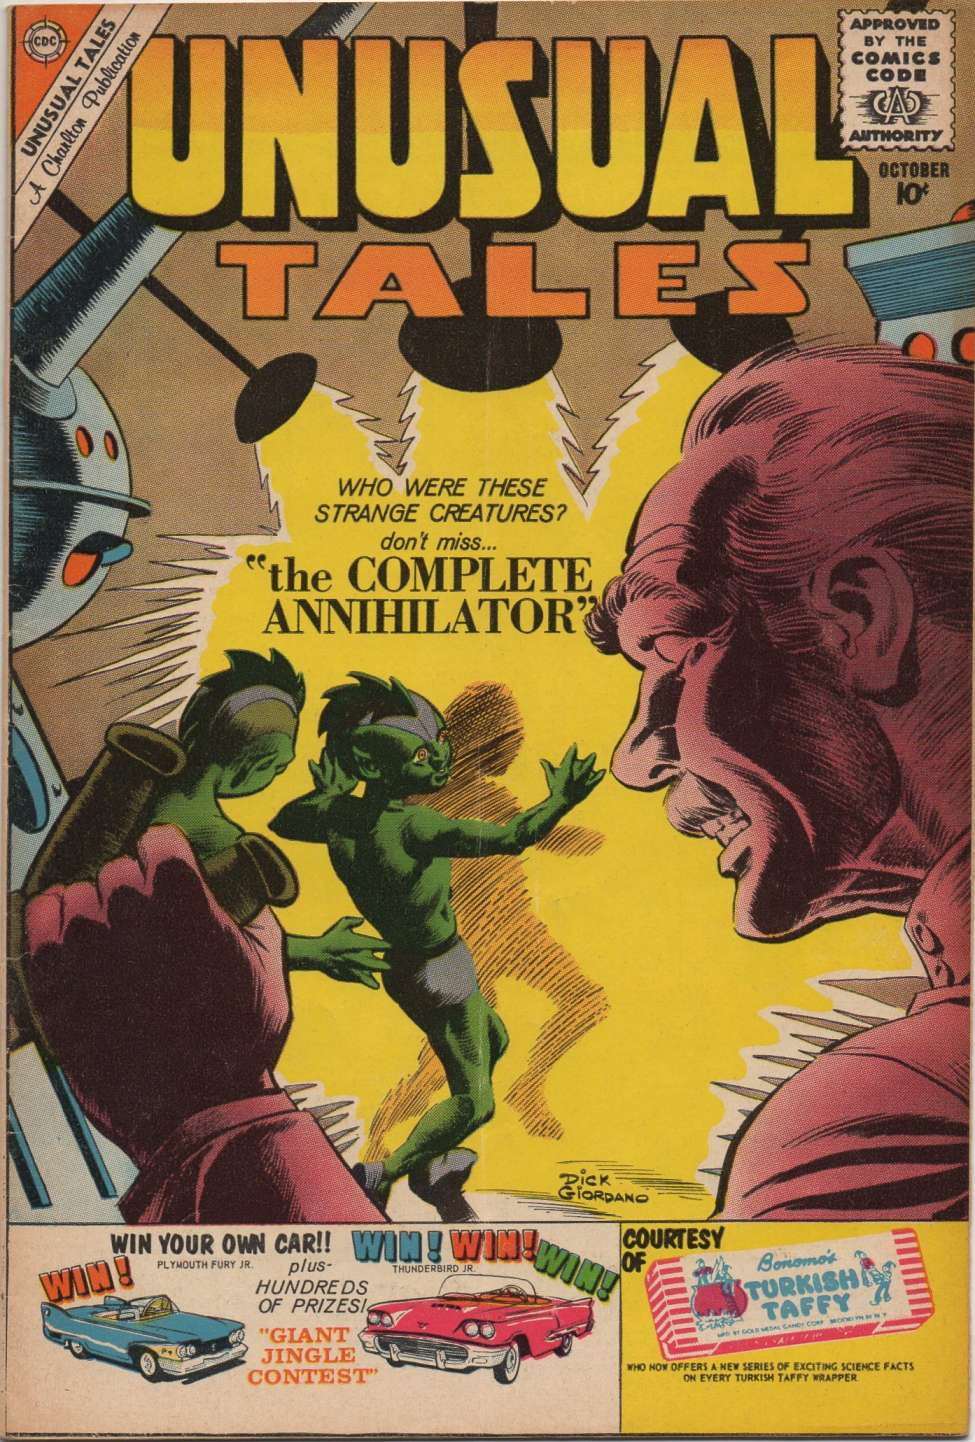 Book Cover For Unusual Tales 24